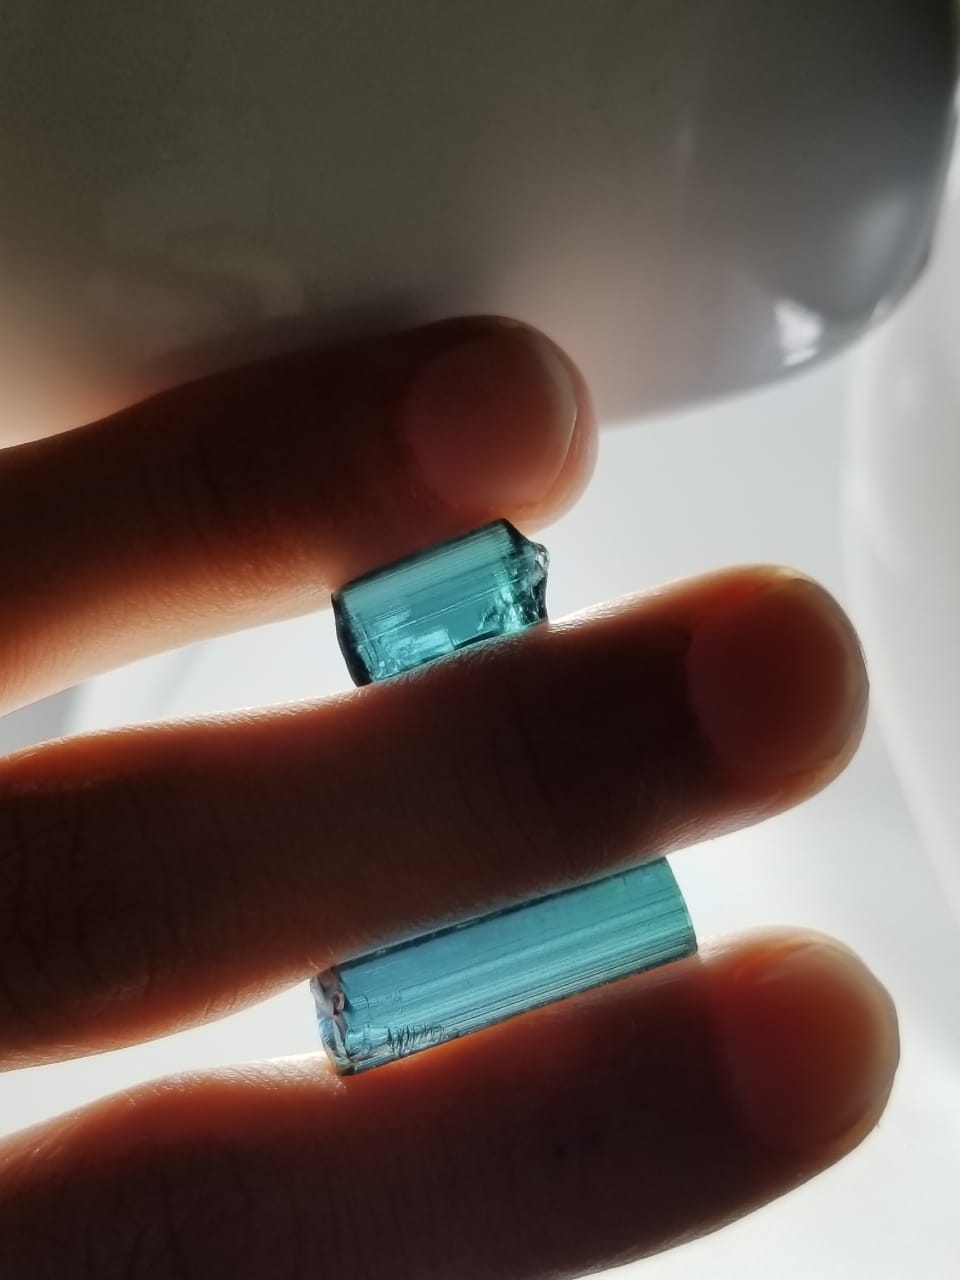 19 Carats of Rough Indicolite Tourmaline for Faceting